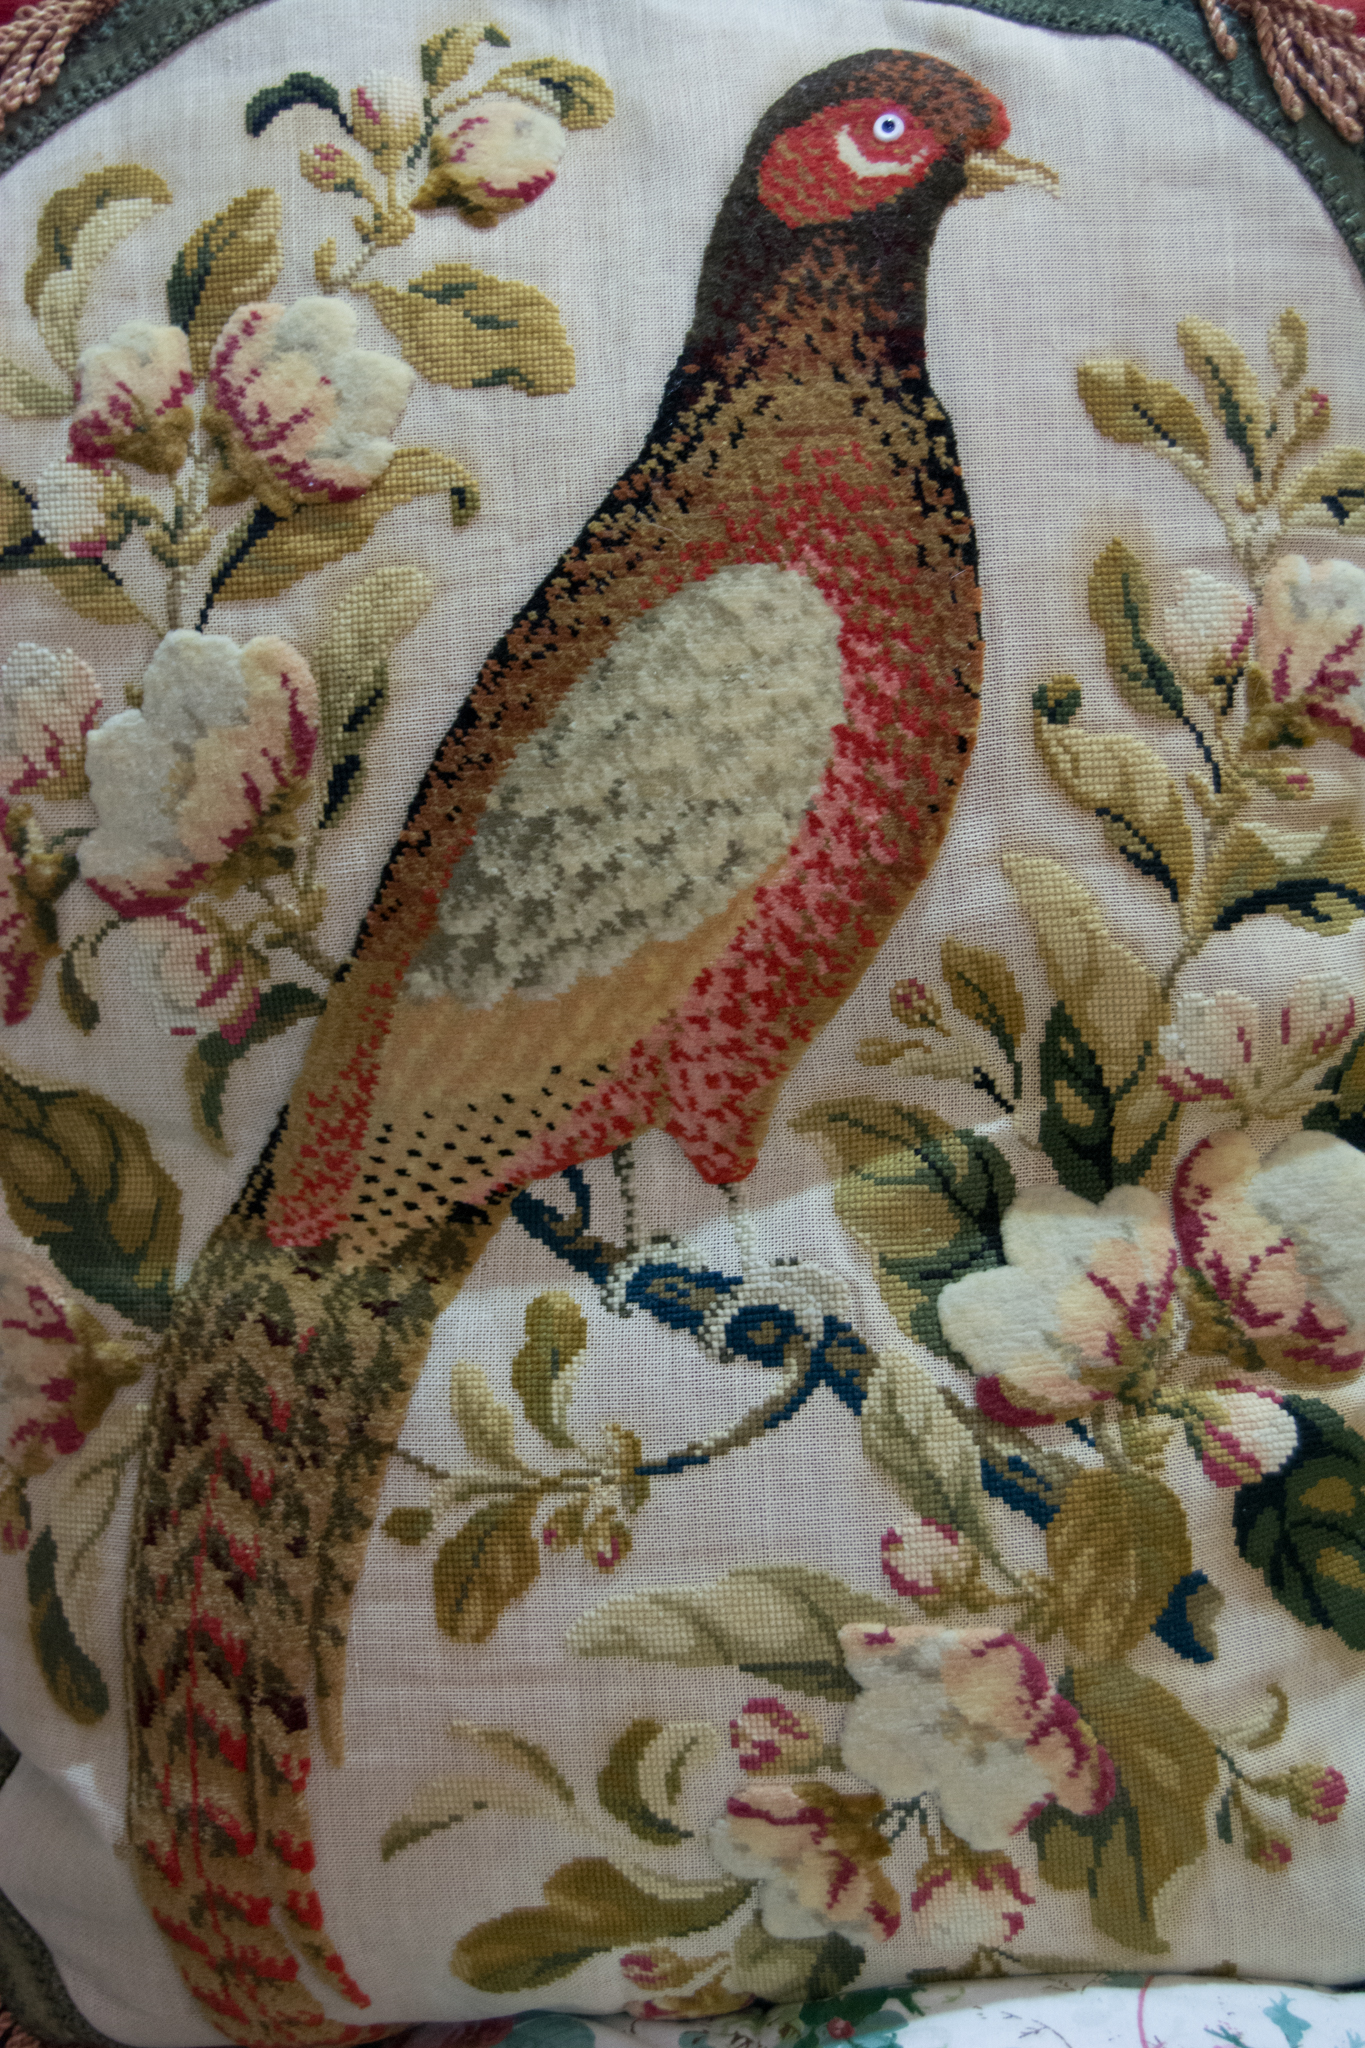 Large decorative red velvet cushion with oval panel of machine wool work bird sitting on a